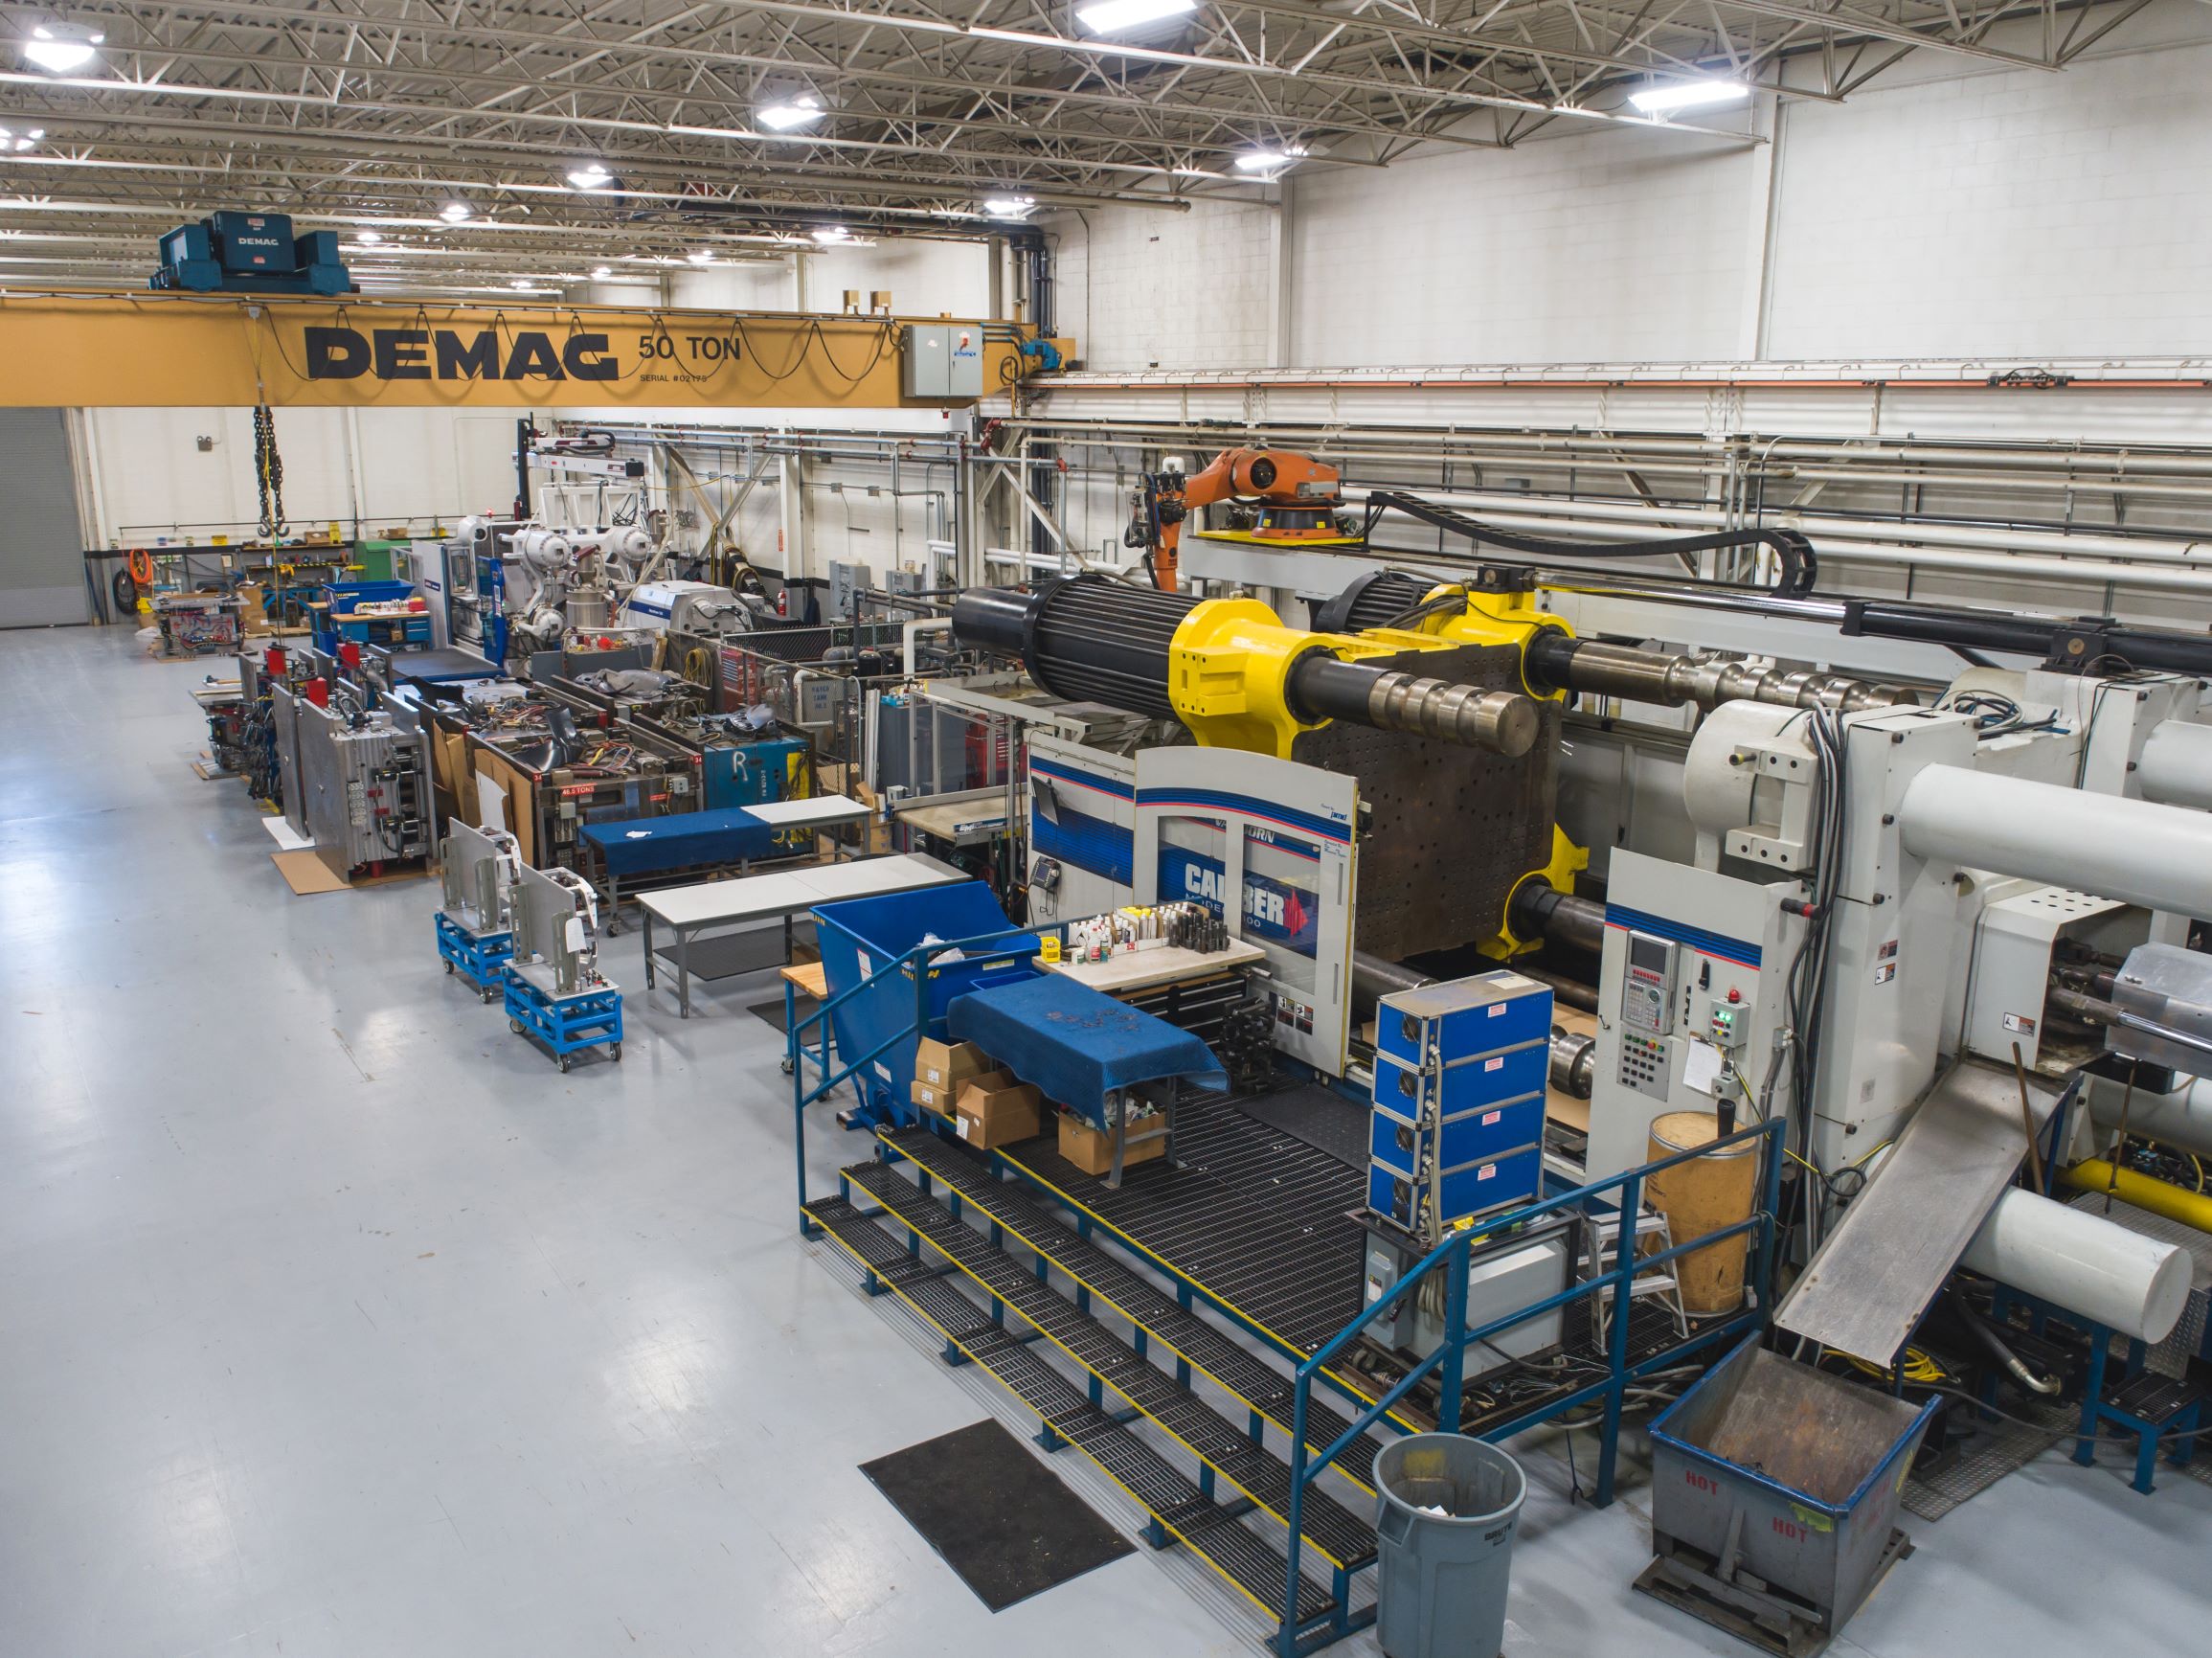 PMD in Sterling Heights, Michigan has been the go-to for plastic injection molding for automotive parts manufacturers for decades.